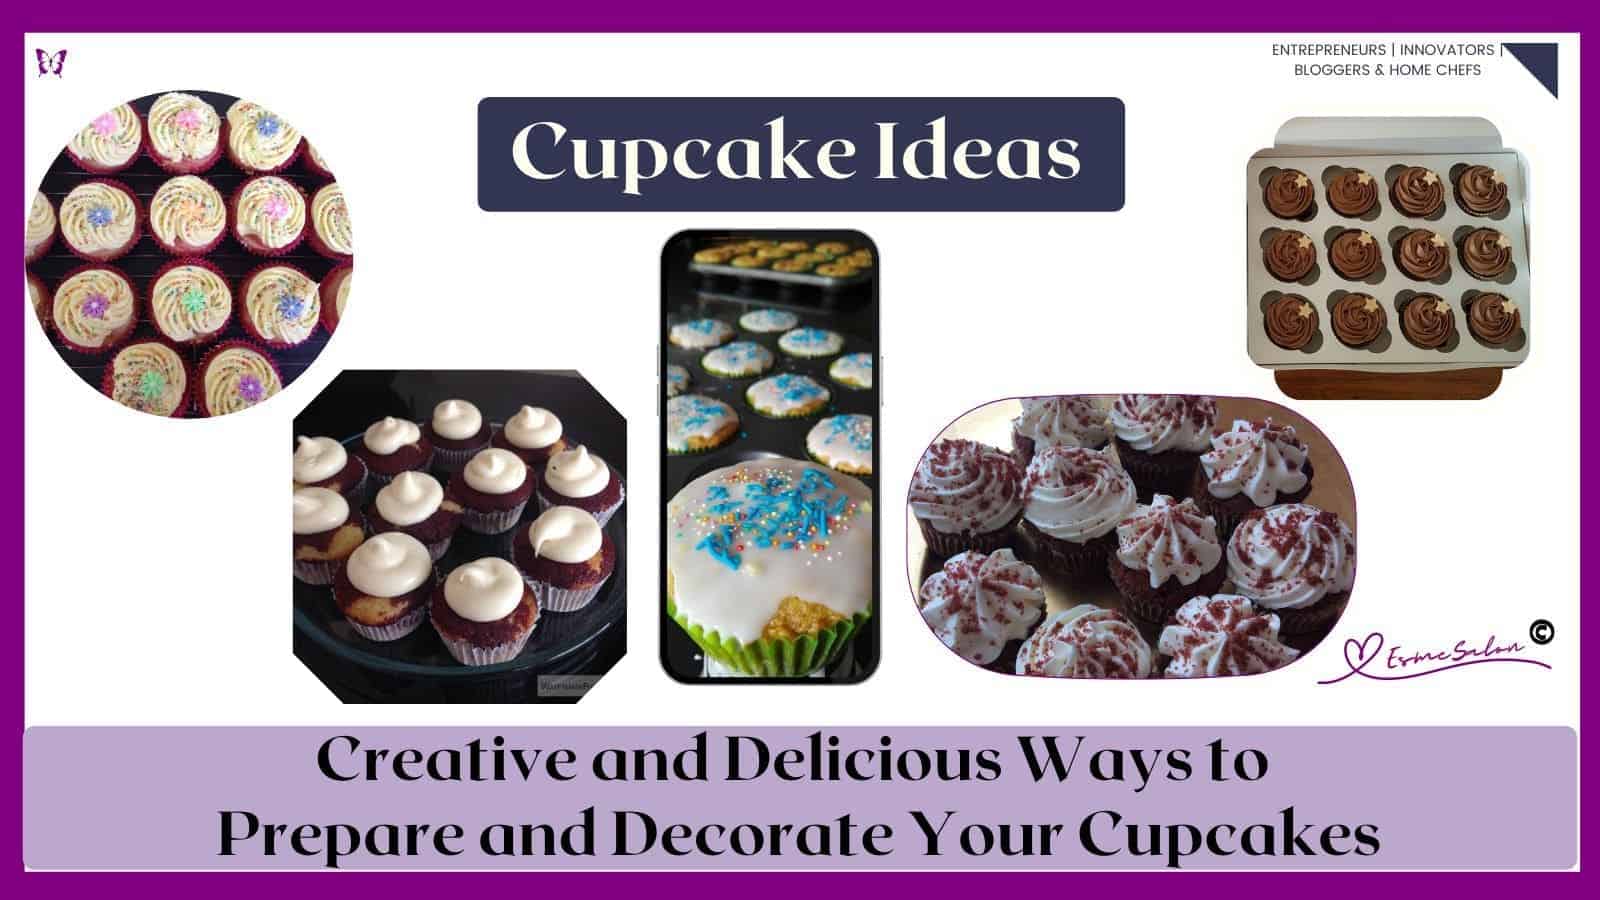 an image of various cupcakes as treats for any occasion